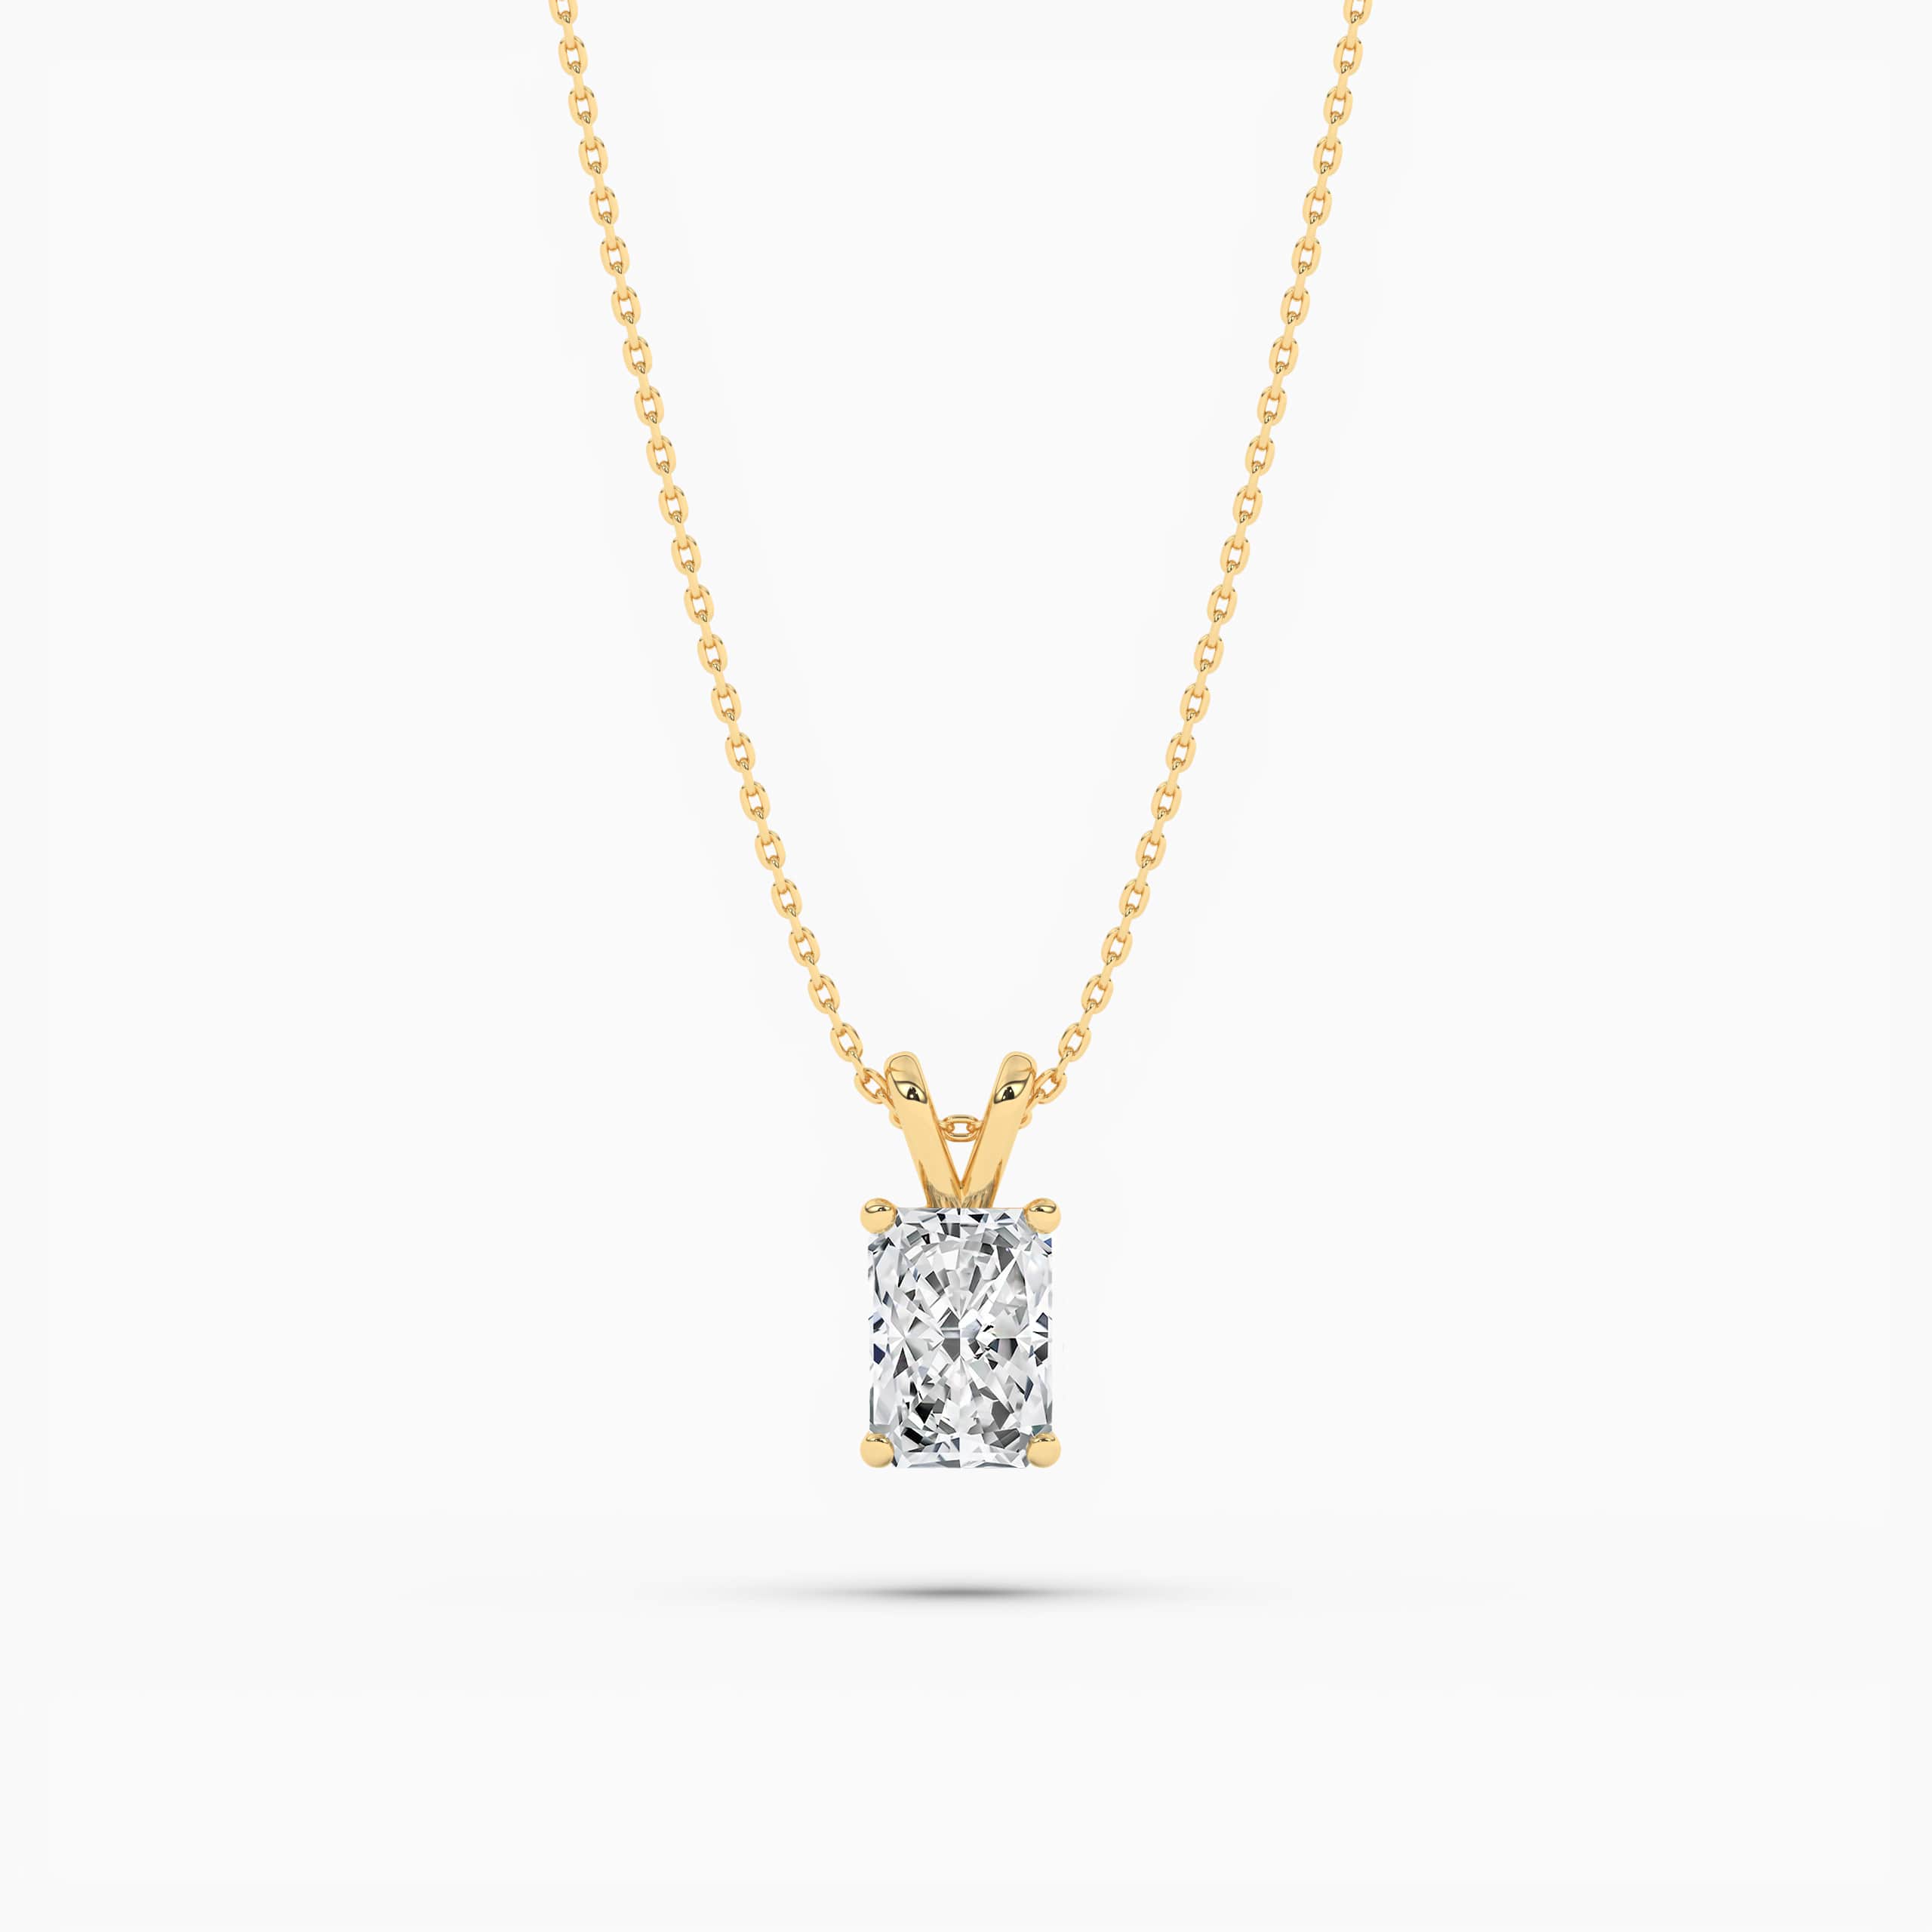 RADIANT CUT DIAMOND SOLITAIRE 4-PRONG PENDANT NECKLACE WITH CHAIN IN YELLOW GOLD 